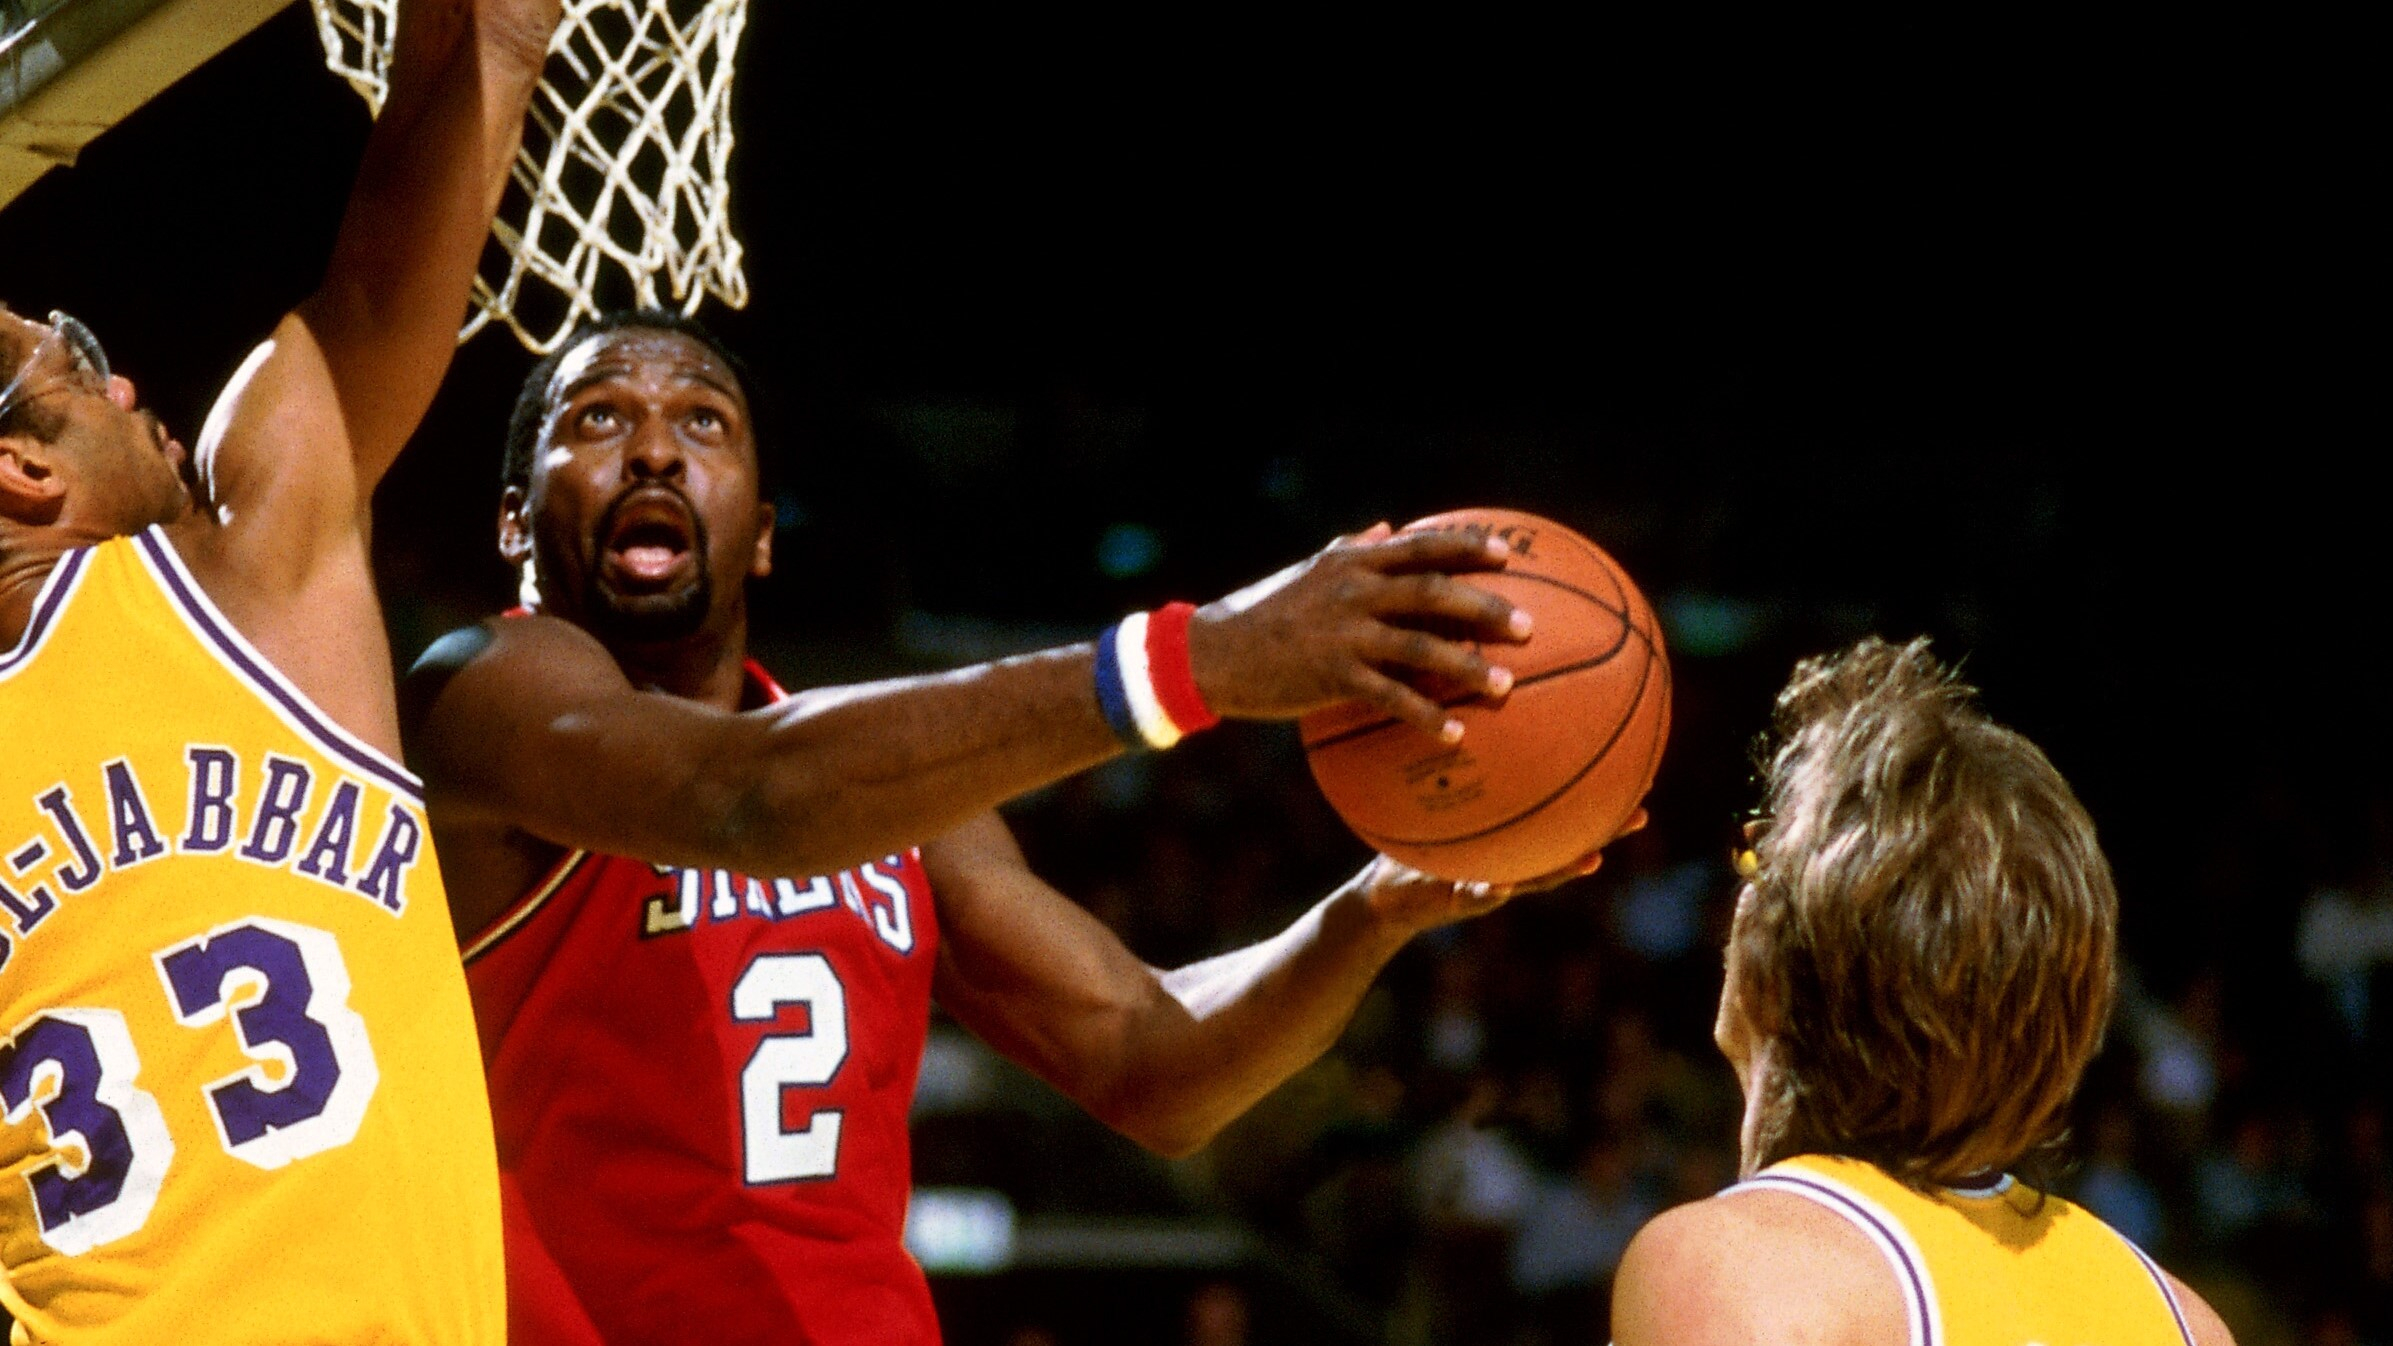 Philadelphia 76ers Moses Malone in action, making dunk vs Los